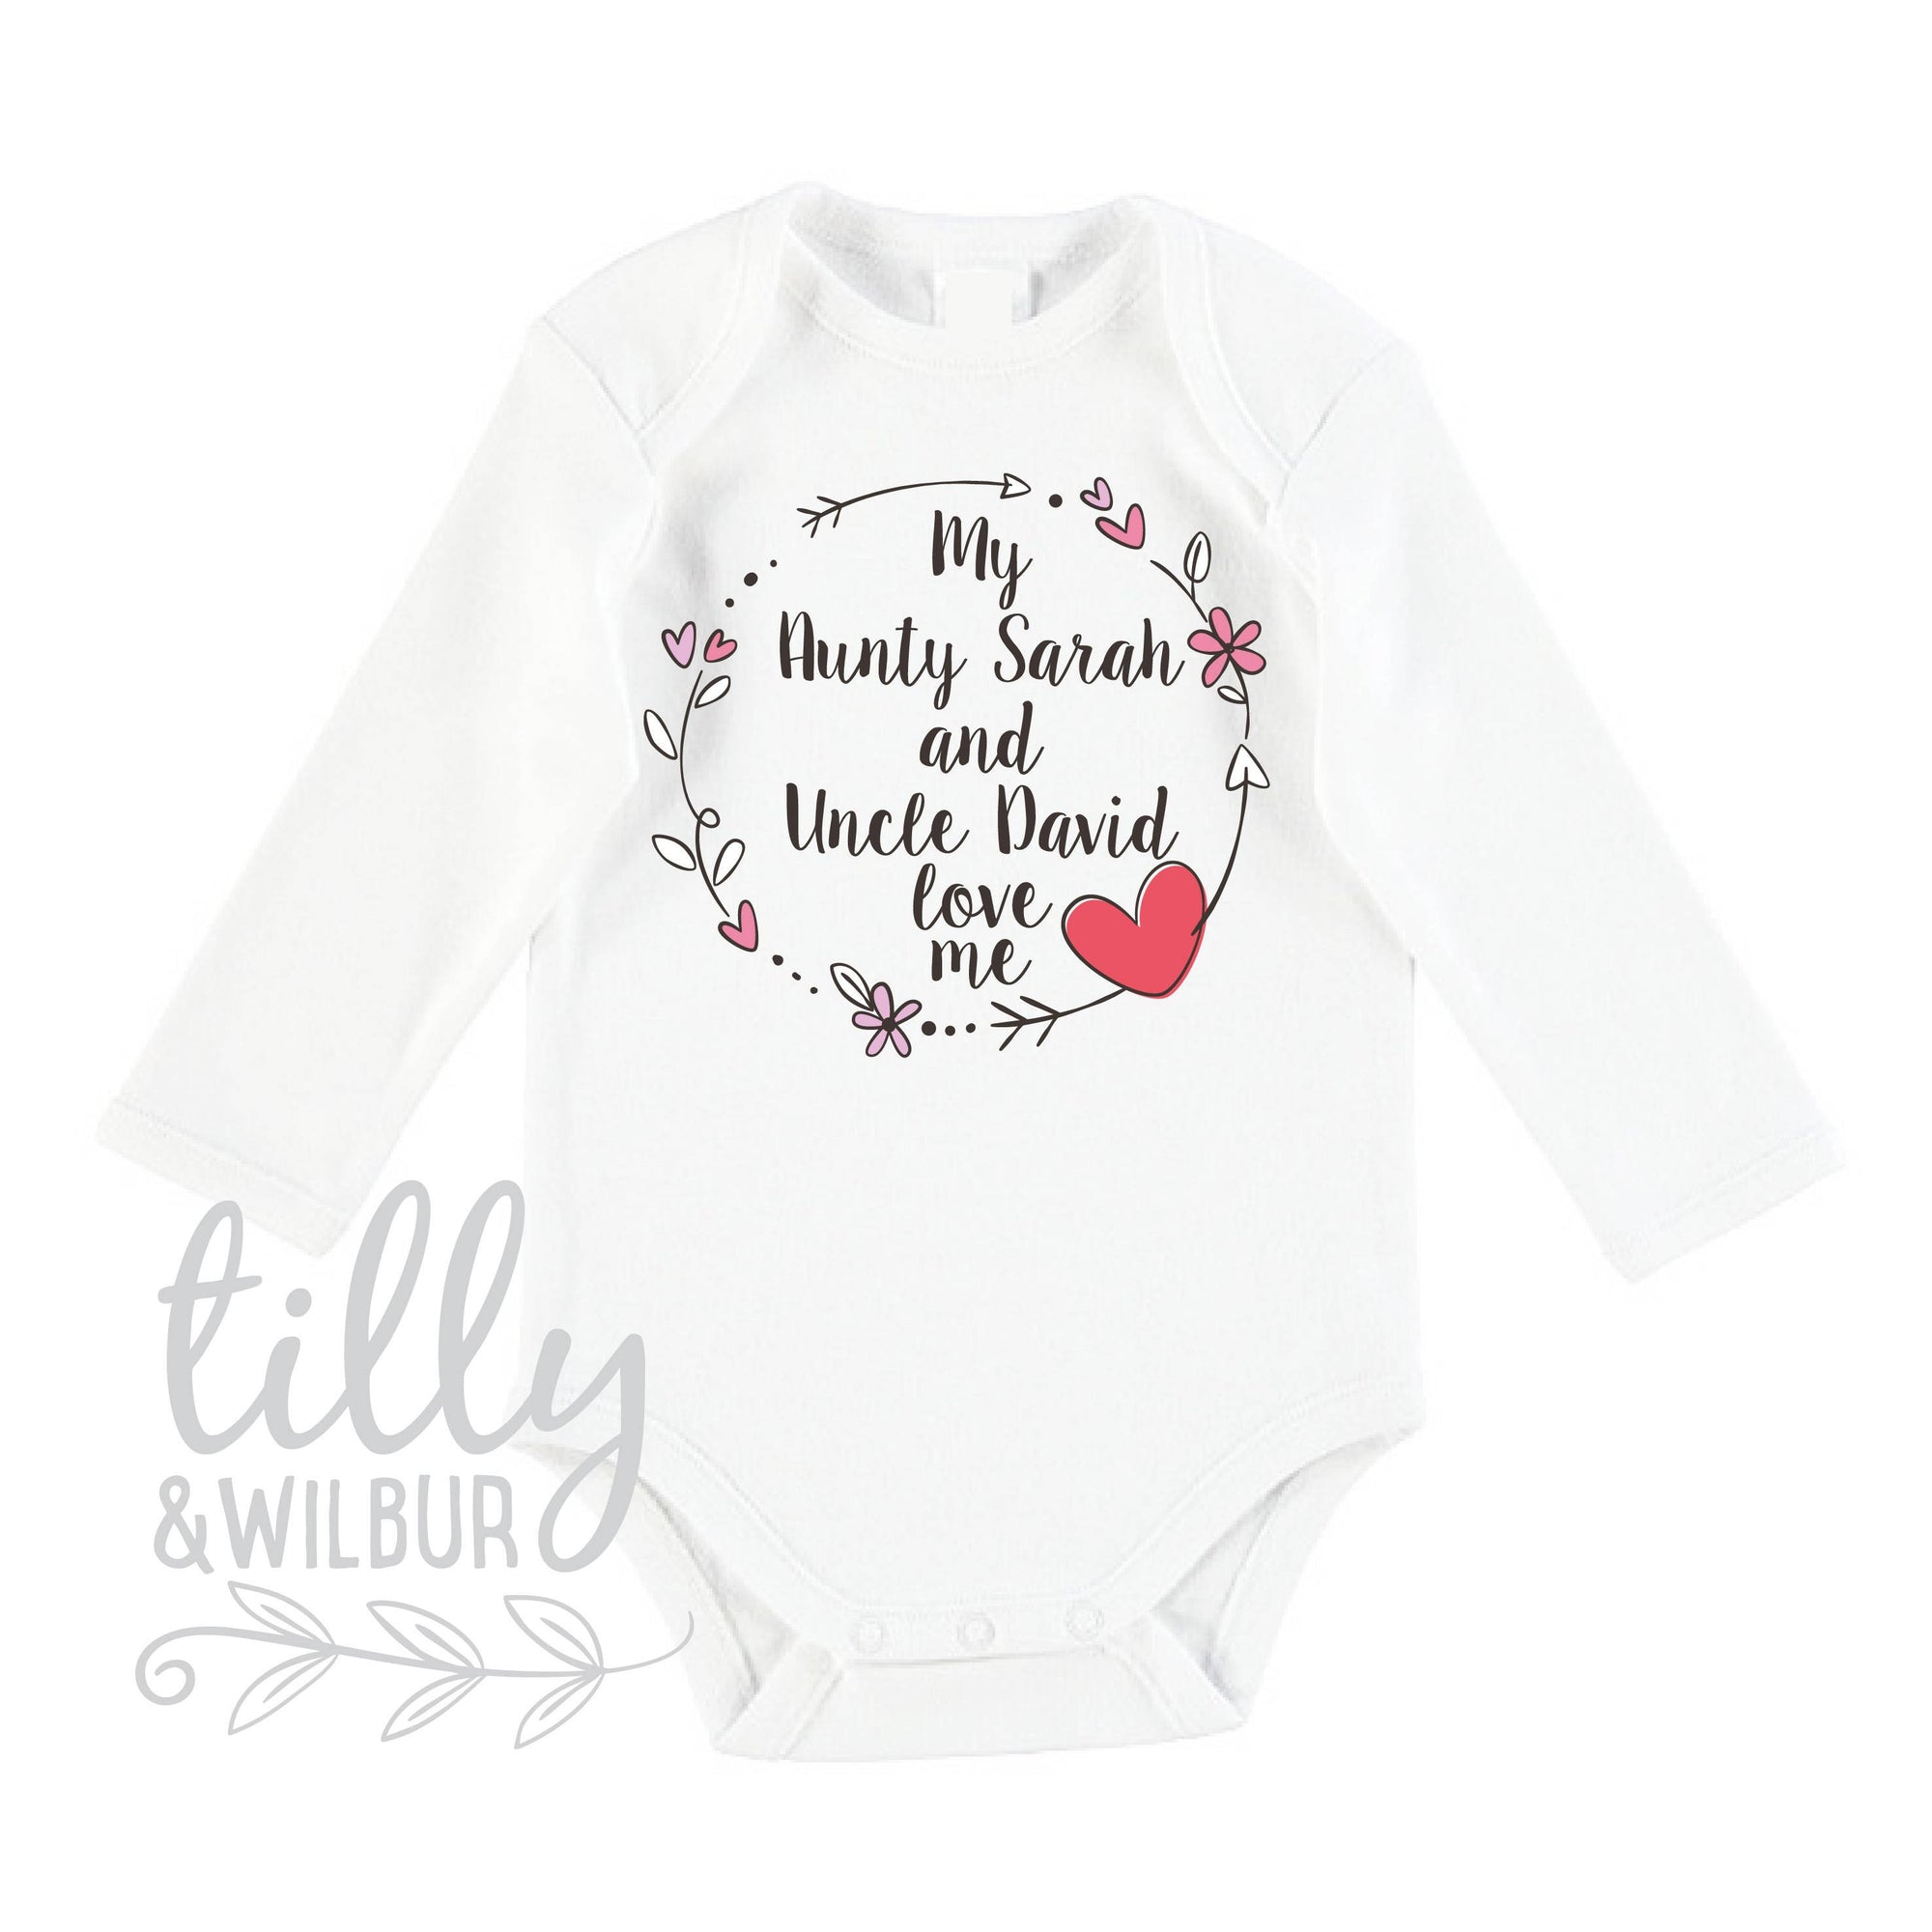 My Aunty And Uncle Love Me Baby Bodysuit For New Arrival Nieces And Nephews, Newborn Gift, Auntie Uncle Gift, Personalised Baby Gift, U-W-BS